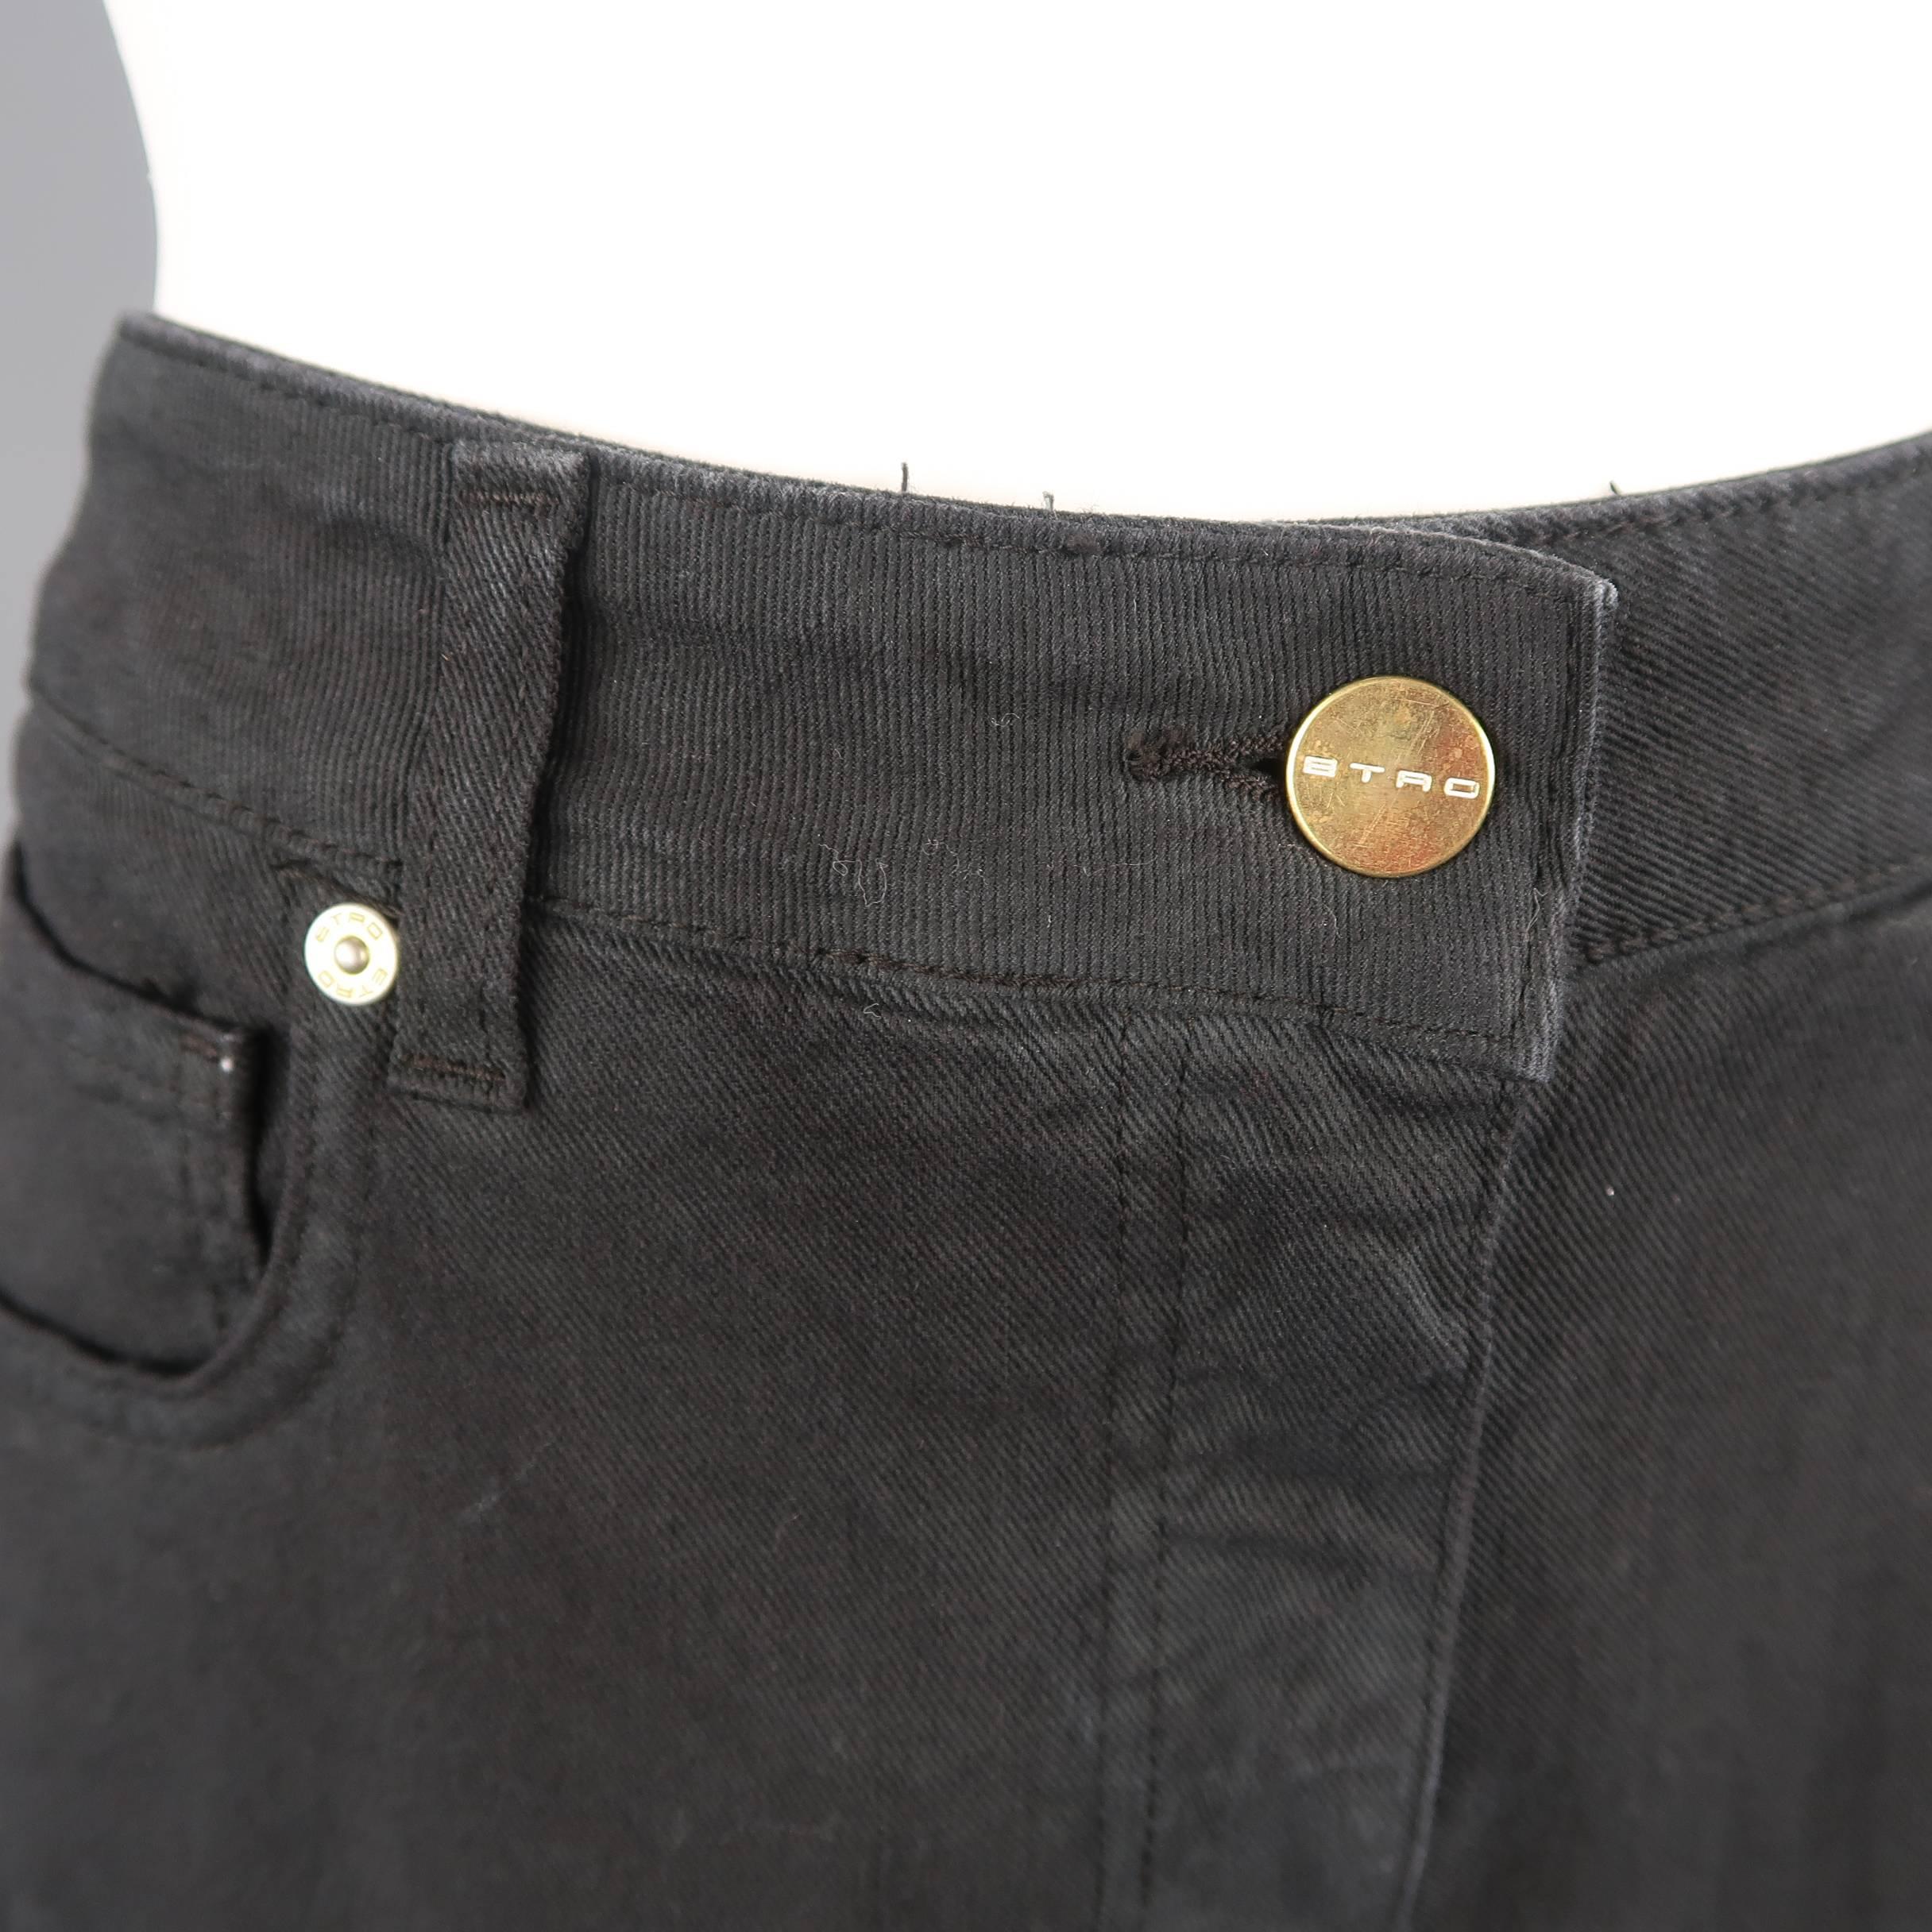 ETRO jeans come in a black cotton blend stretch denim twill with gold tone hardware, slim boot cut fit, frayed hem, and floral print stripe sides. Made  in Italy.
 
New with Tags.
Marked: 29
 
Measurements:
 
Waist: 31 in.
Rise: 10.5 in.
Inseam: 33